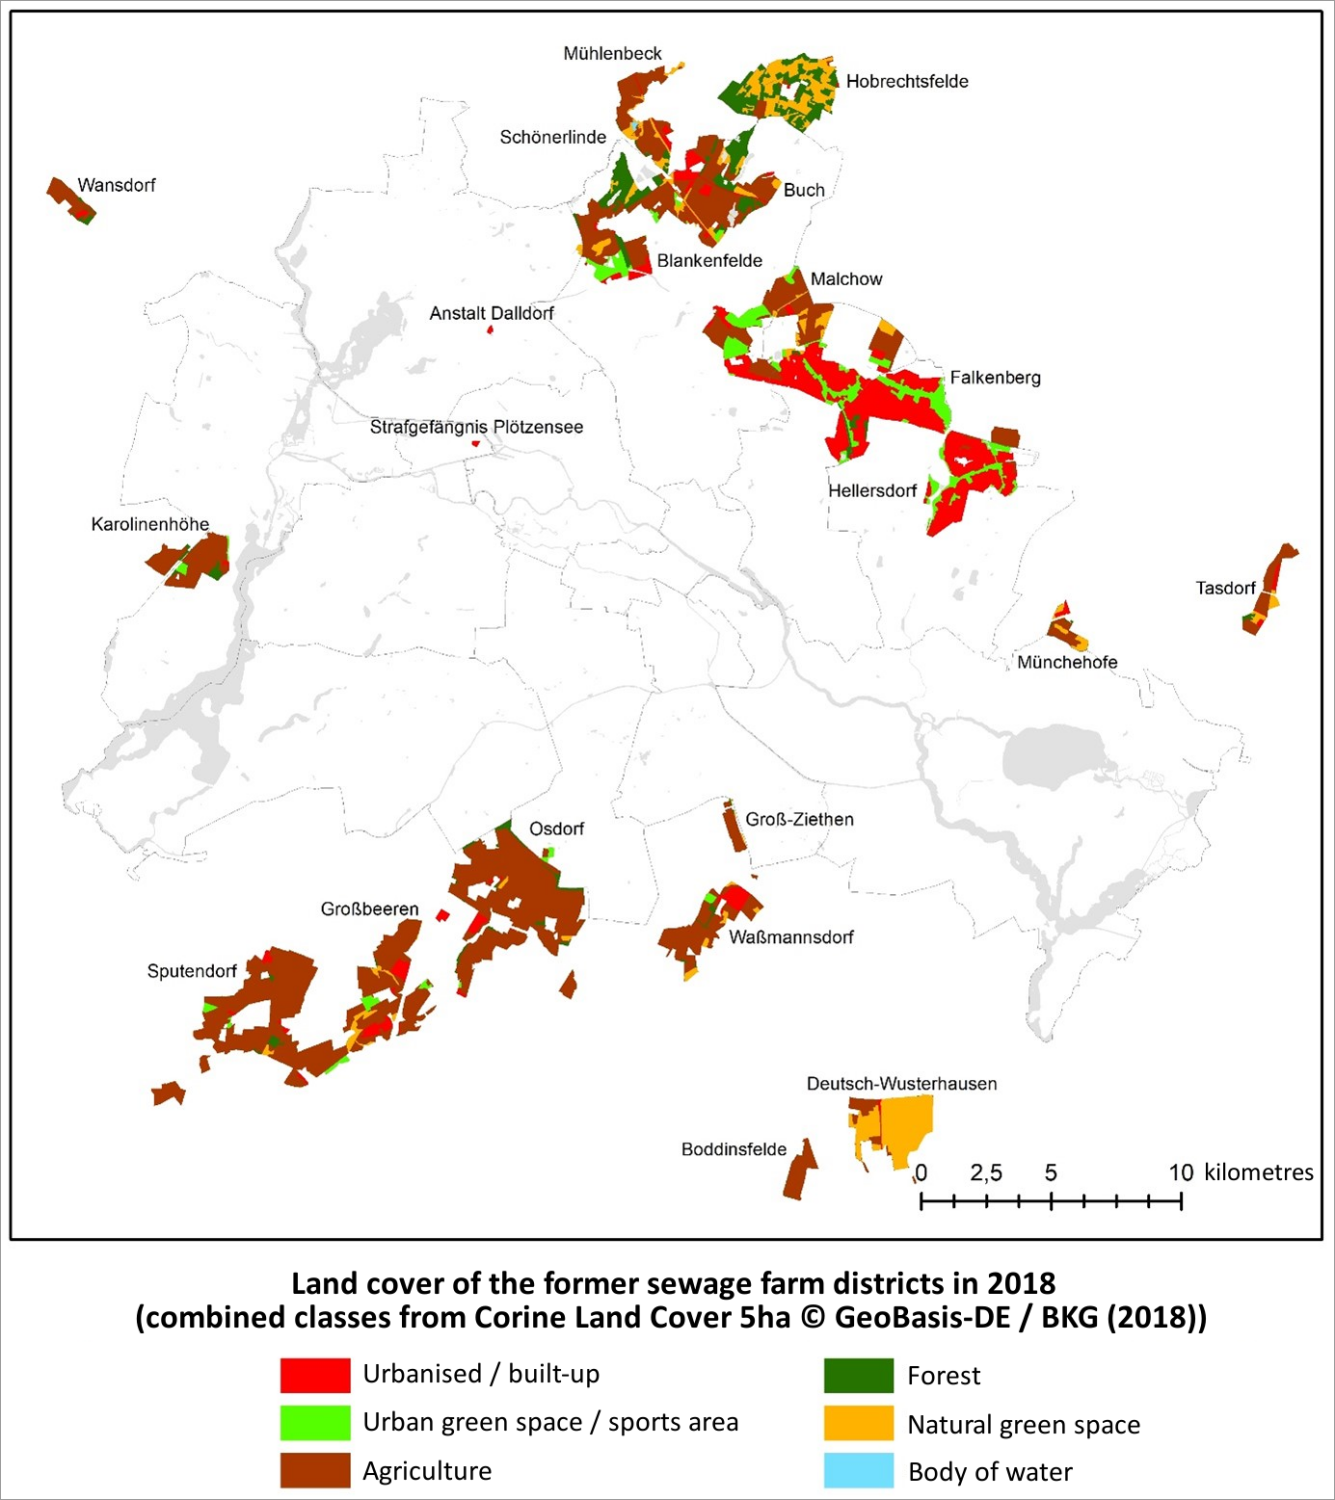 Fig. 3: Land cover of the former sewage farm districts in 2018